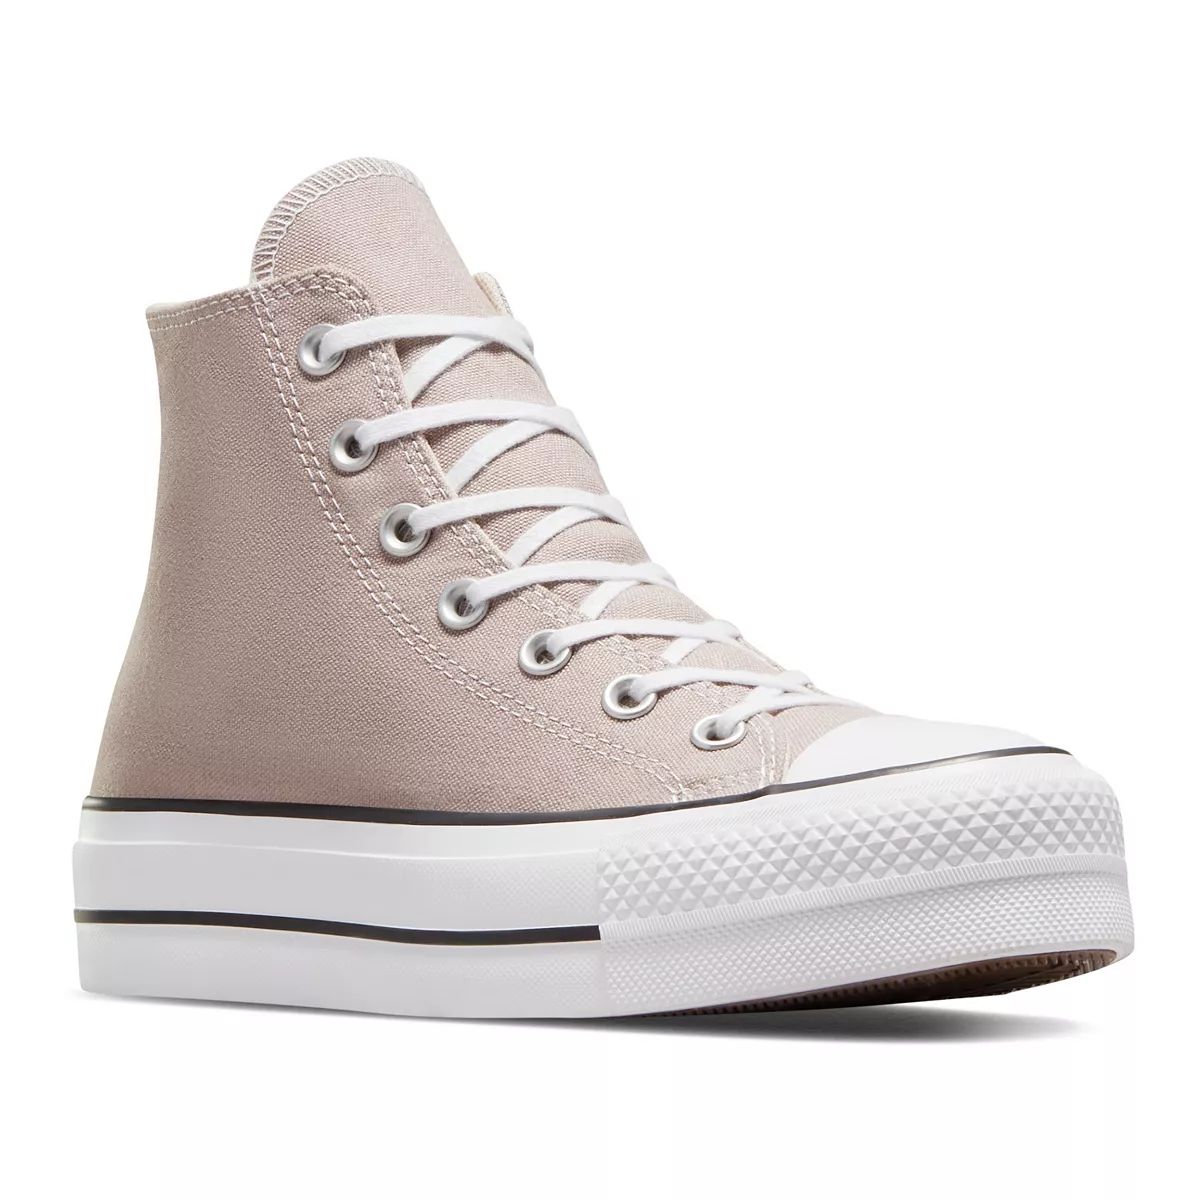 Converse Chuck Taylor All Star Lift Women's High Top Shoes | Kohl's